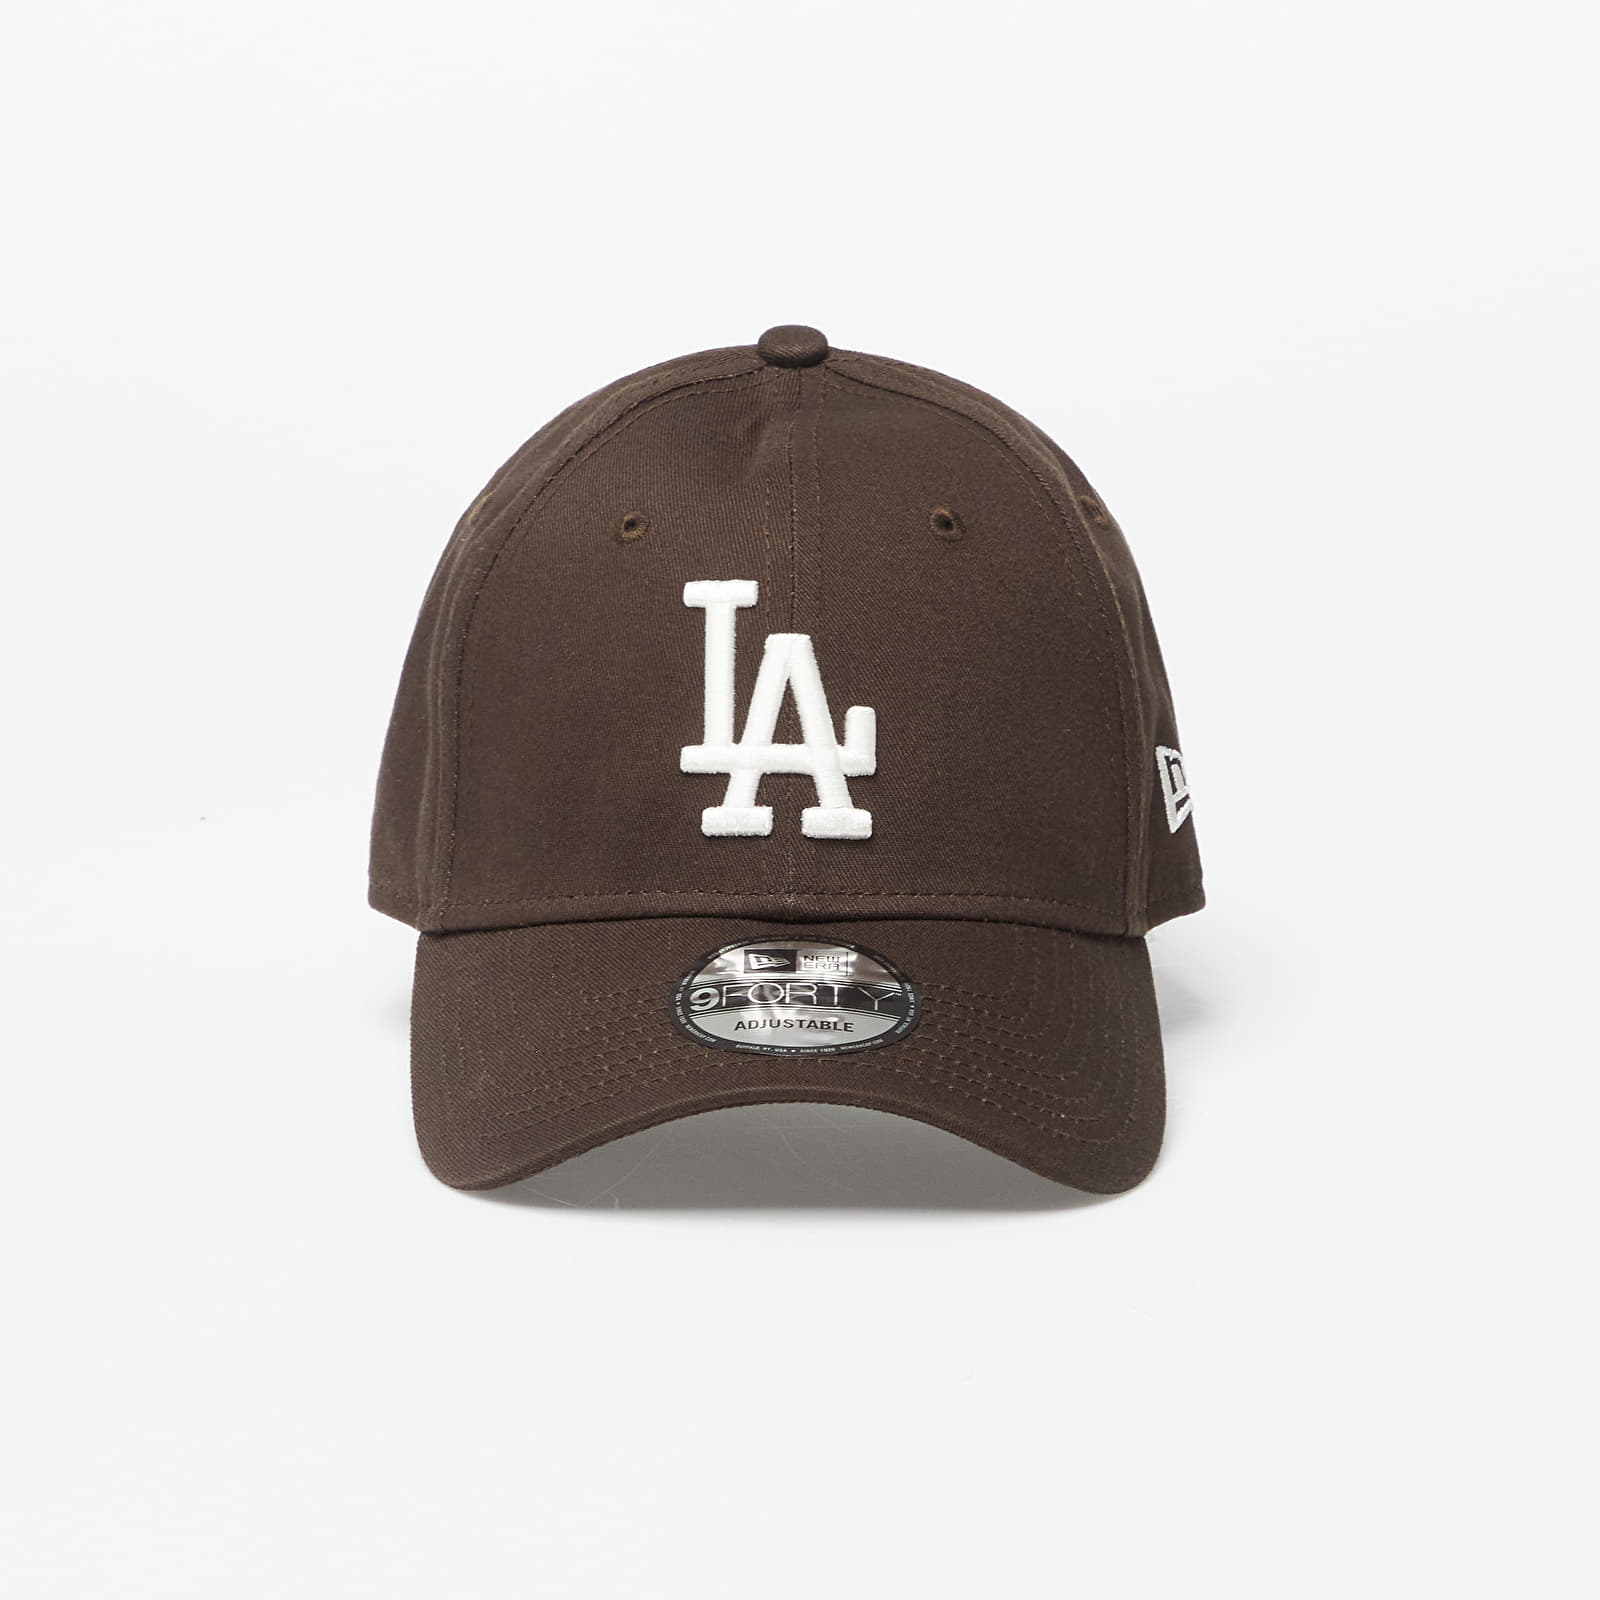 Caps New Era Los Angeles Dodgers League Essential 9FORTY Adjustable Cap Brown Suede/ Off White